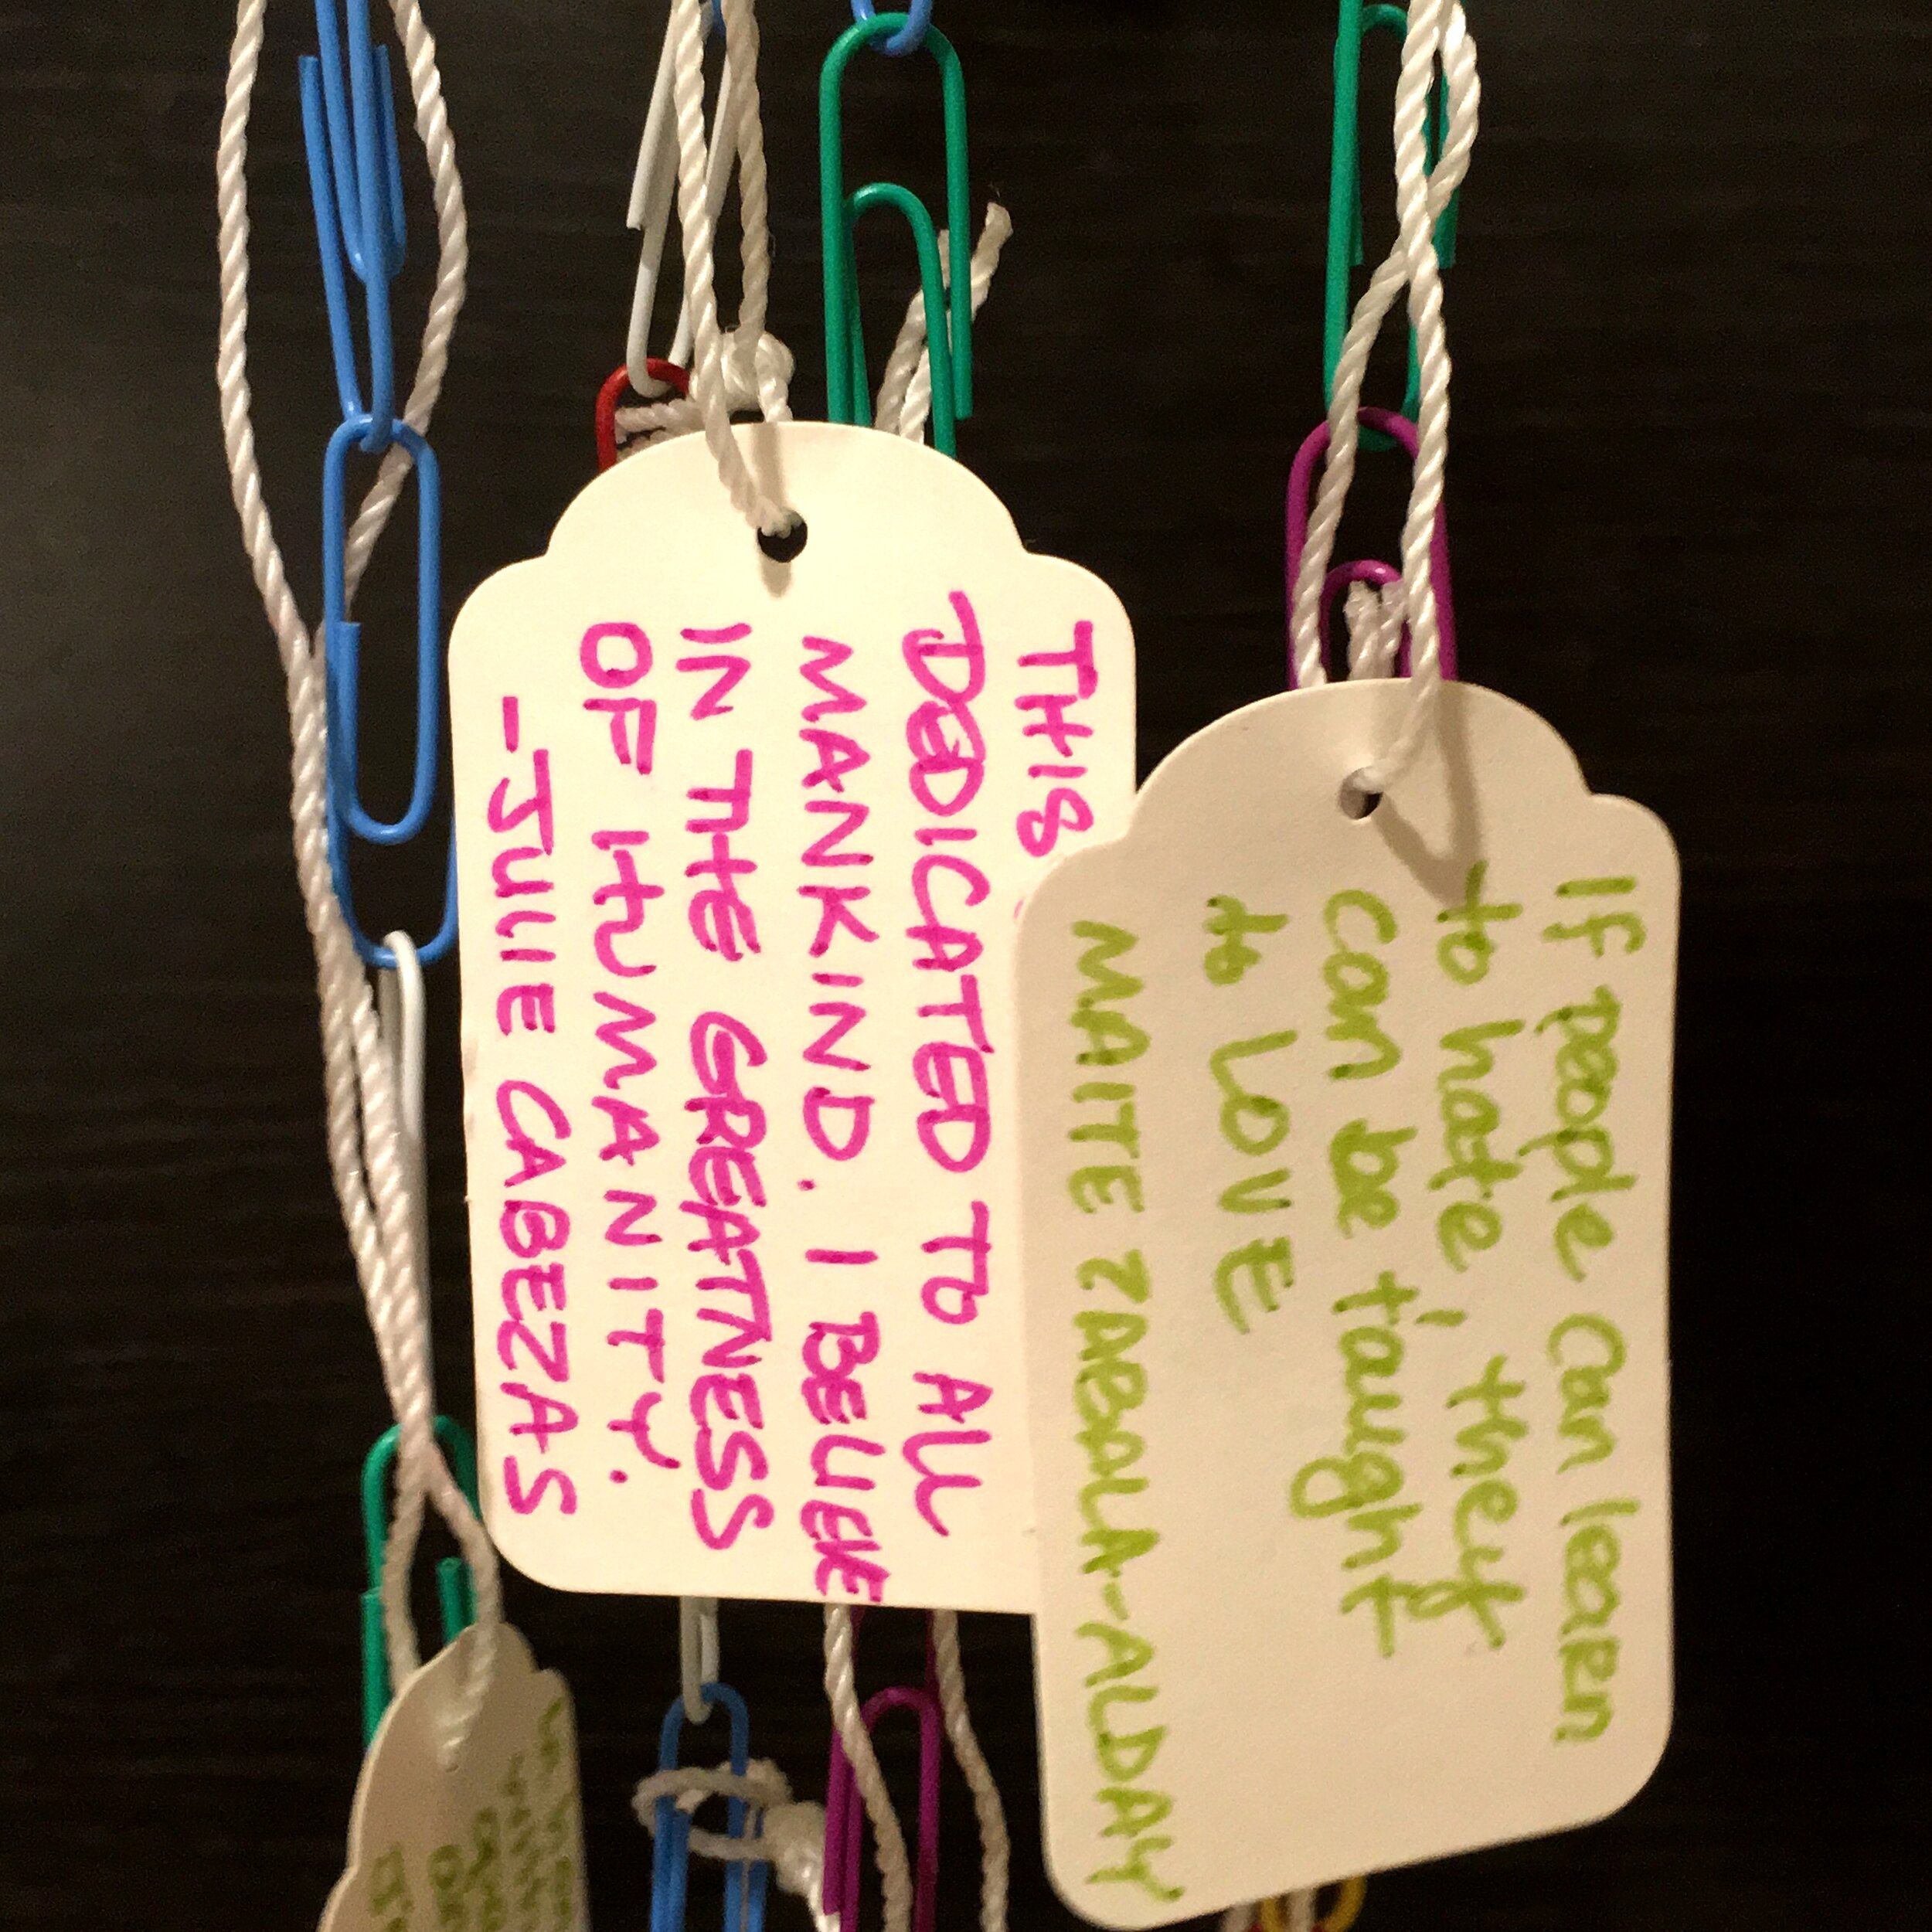 Paperclips from this project's donors, delivered by Stephanie to the boxcar